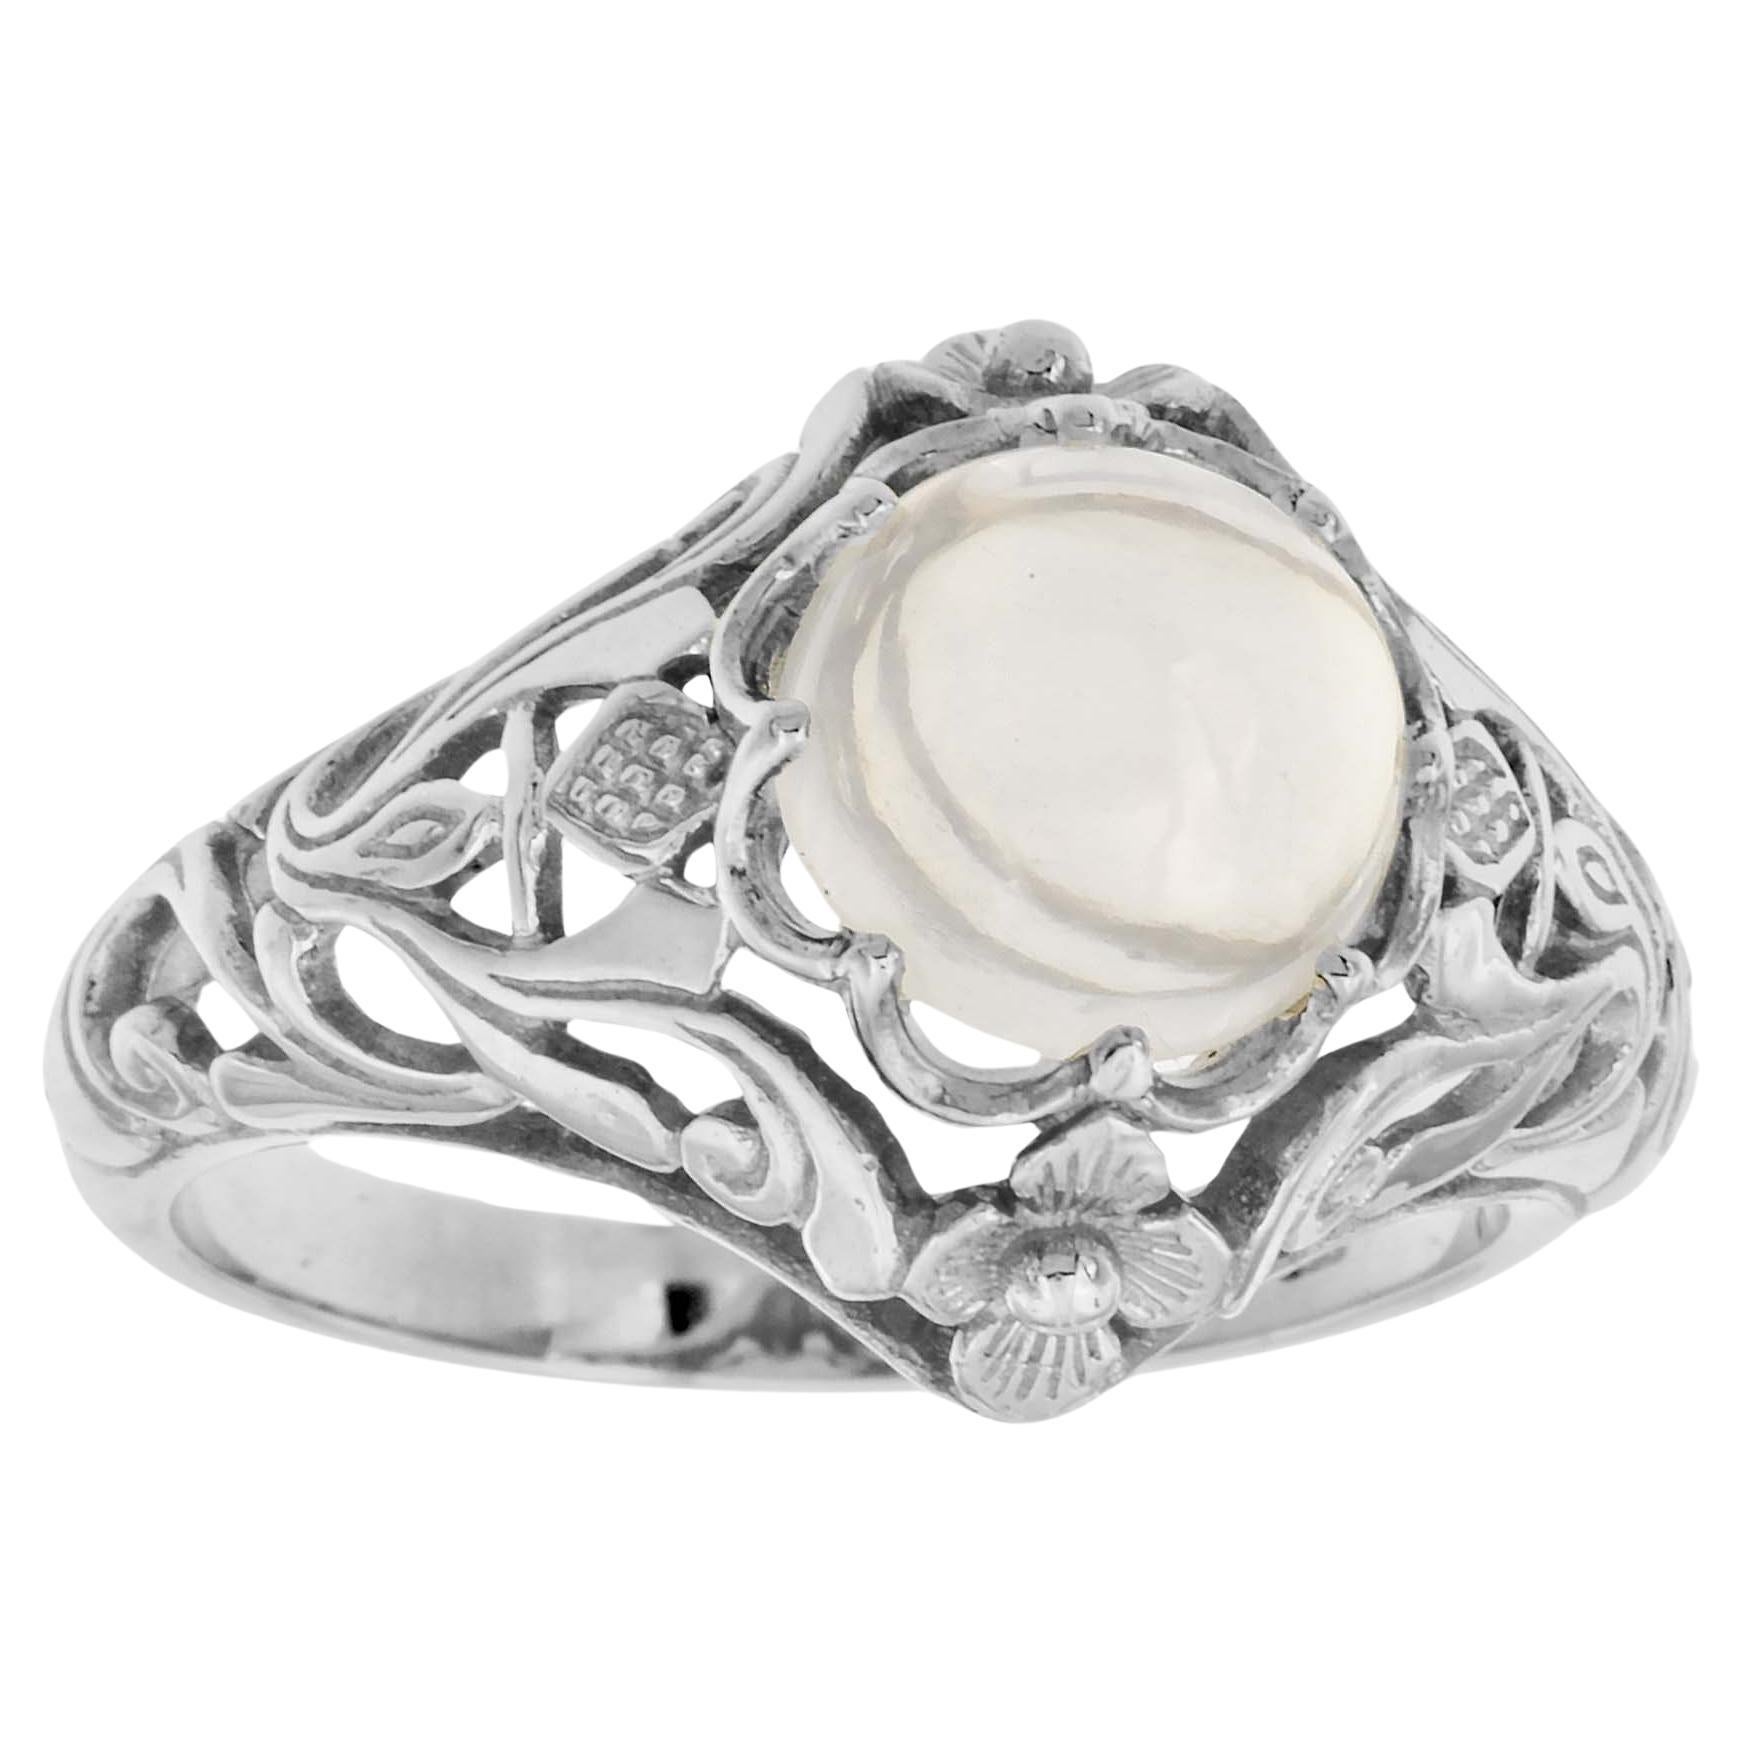 For Sale:  Natural Moonstone Vintage Style Filigree Ring in Solid 9K White Gold